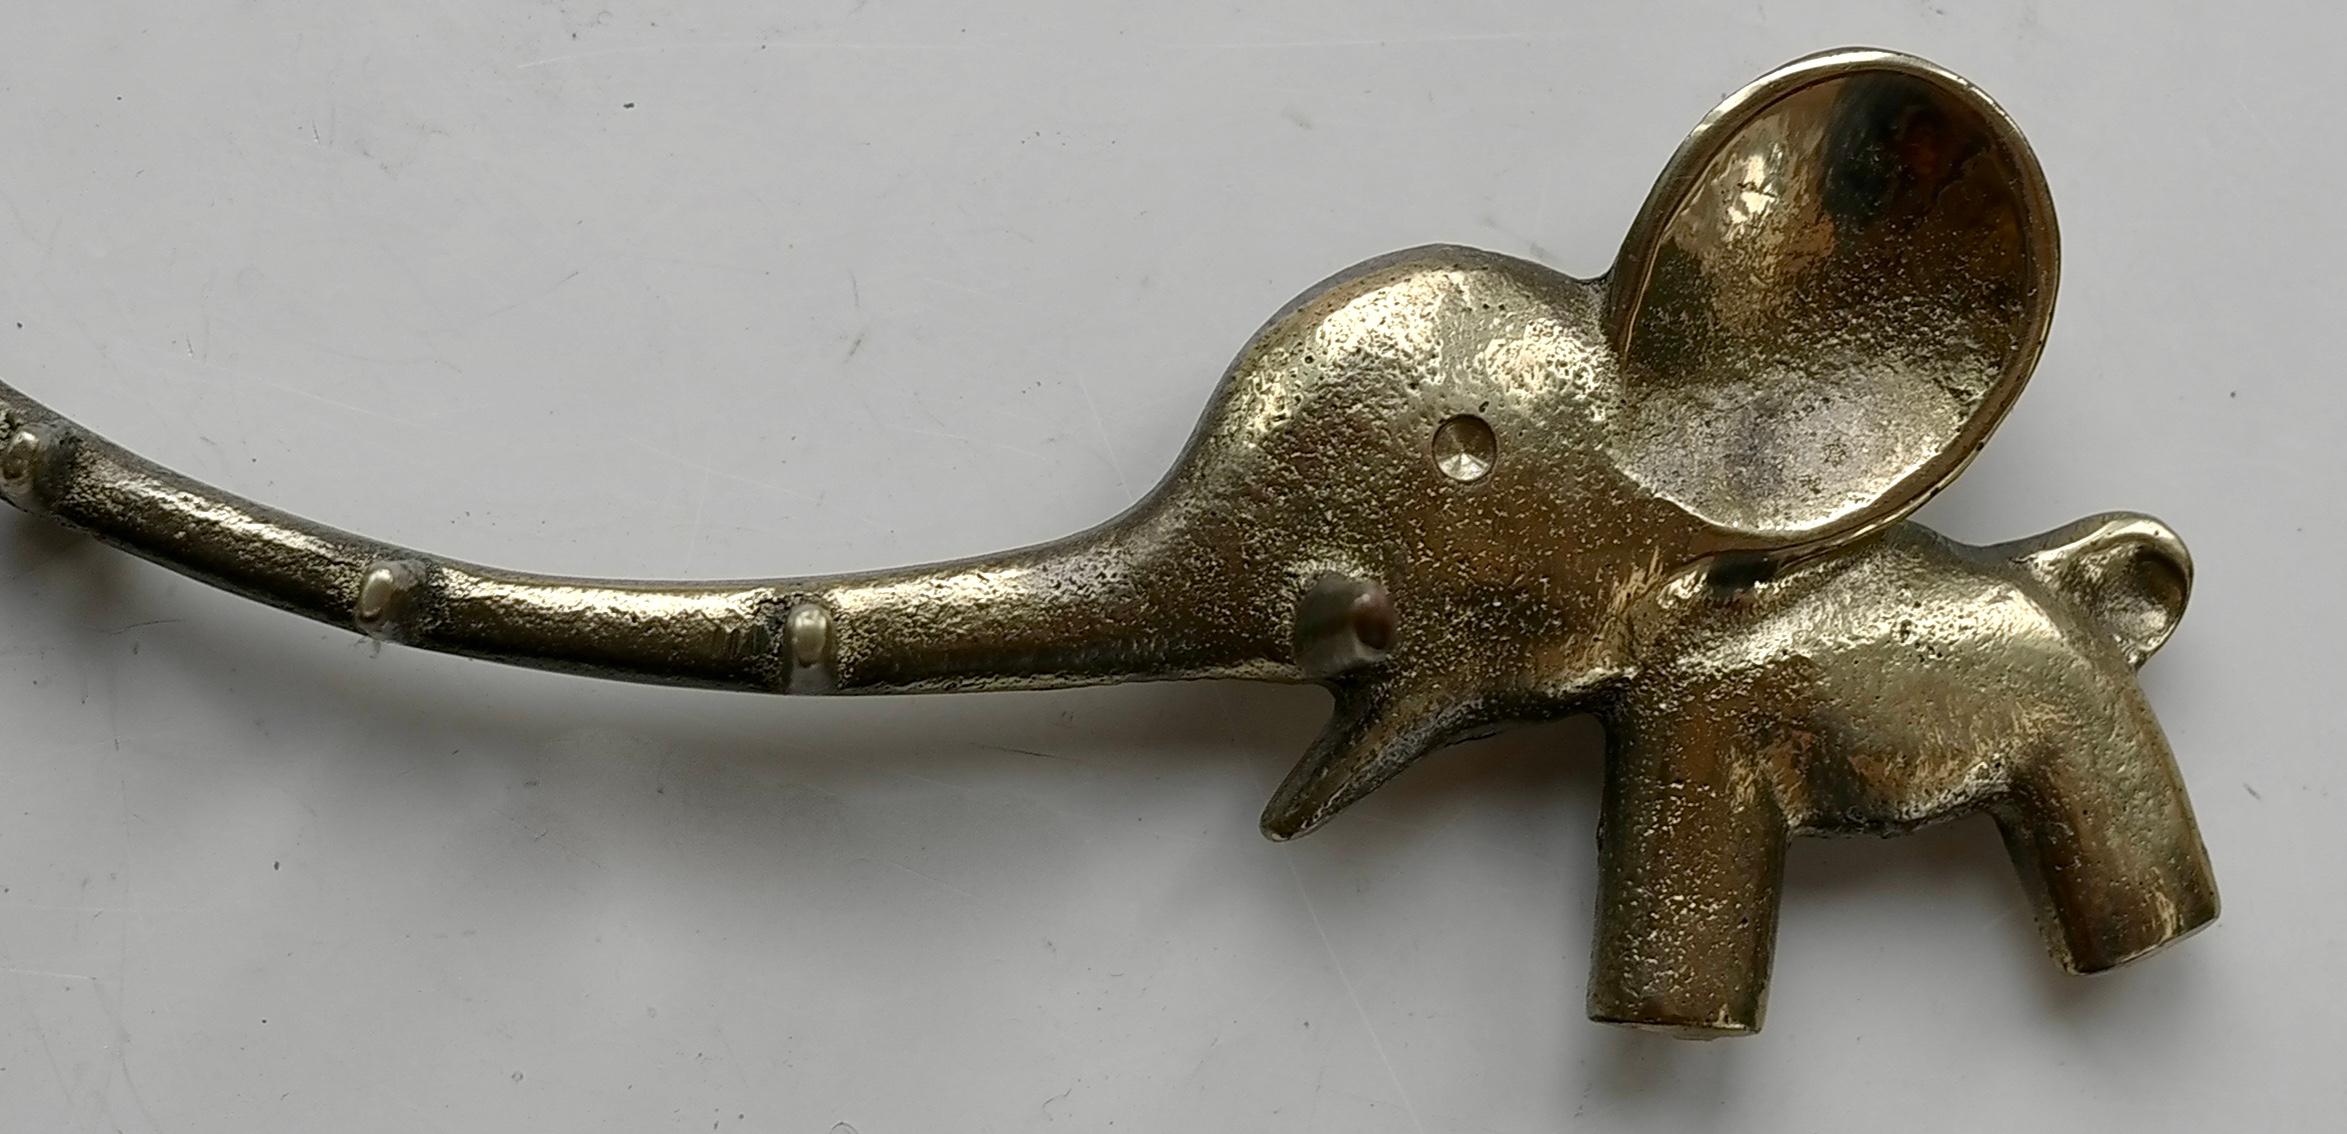 A charming and rare vintage midcentury key holder, displaying an elephant and a little mouse. A very humorous design by Walter Bosse, executed by Hertha Baller Austria in the 1950s. Made of brass, in very good condition. Also suitable as a towel